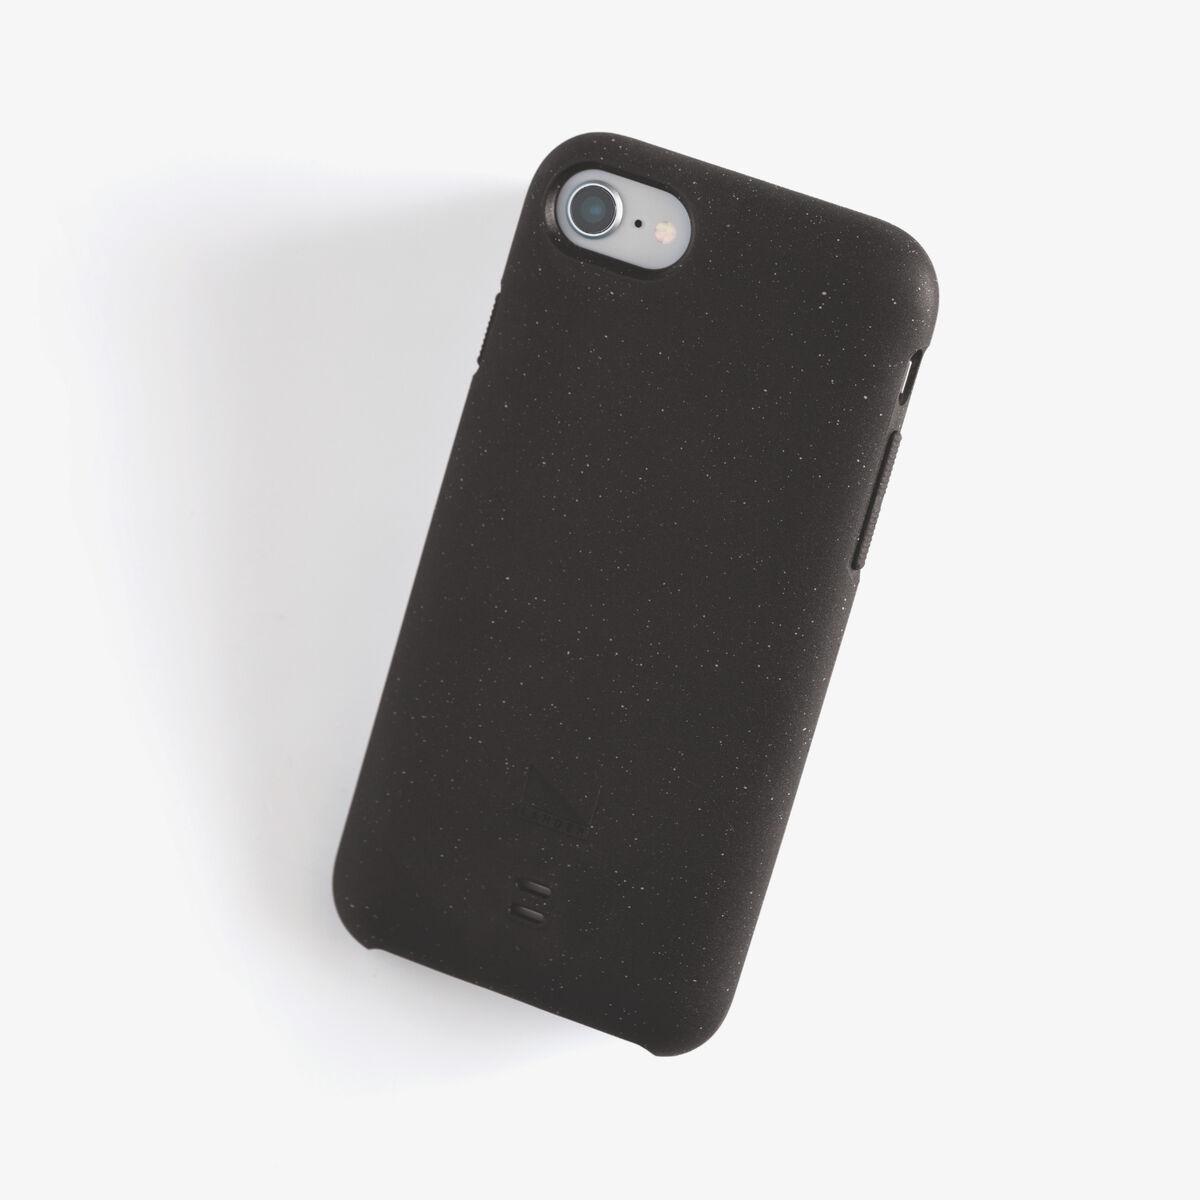 Torrey™ Case for Apple iPhone 6, 6s, 7 and 8